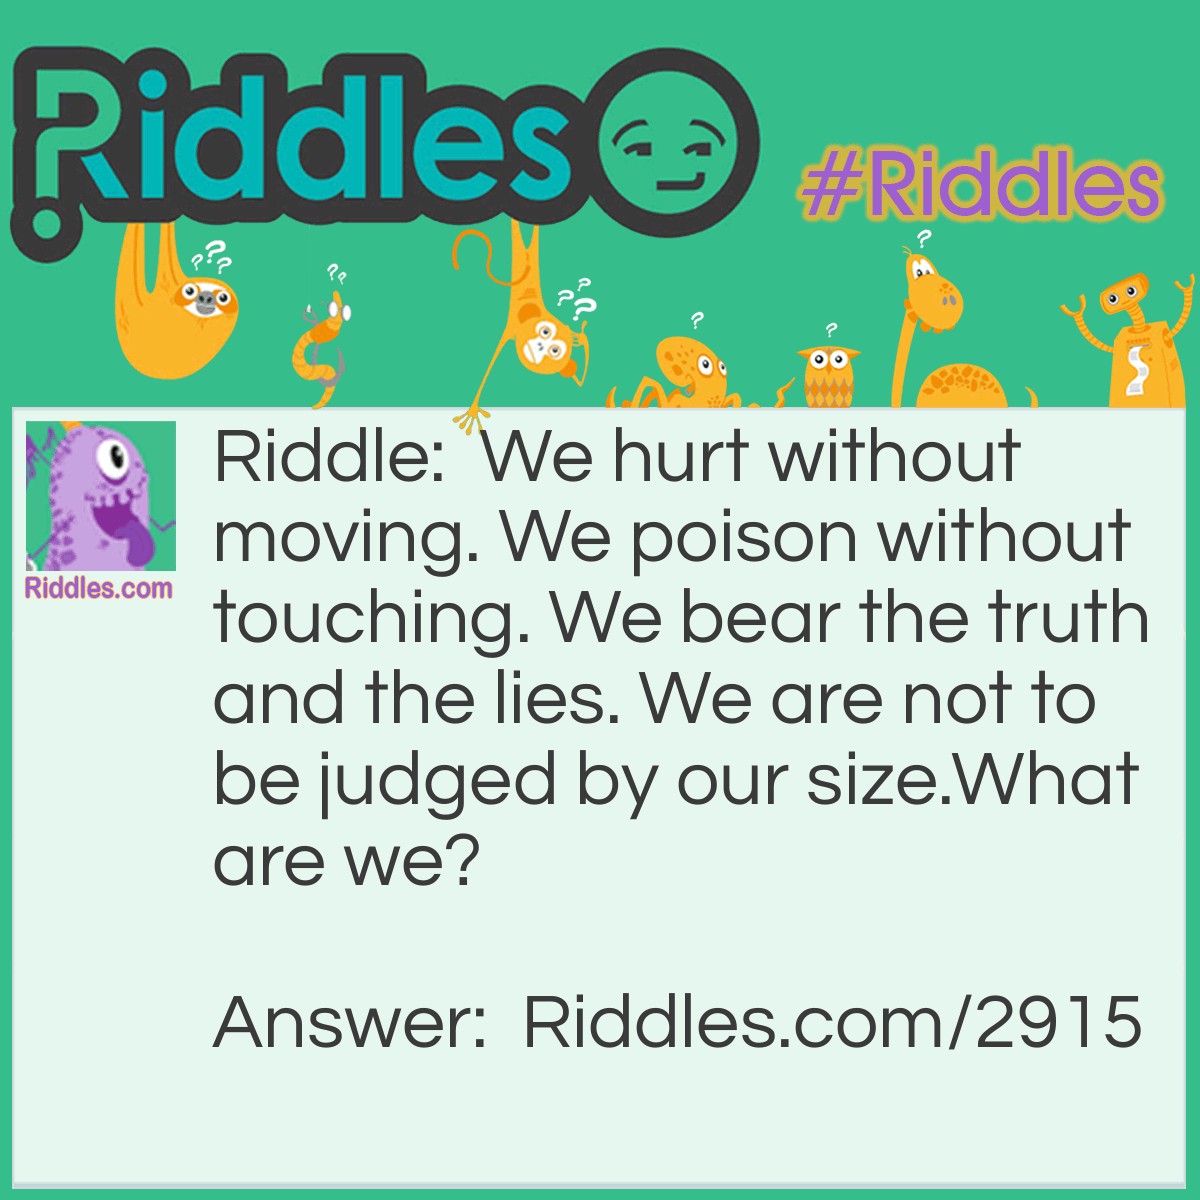 Riddle: We hurt without moving. We poison without touching. We bear the truth and the lies. We are not to be judged by our size. What are we? Answer: Words.